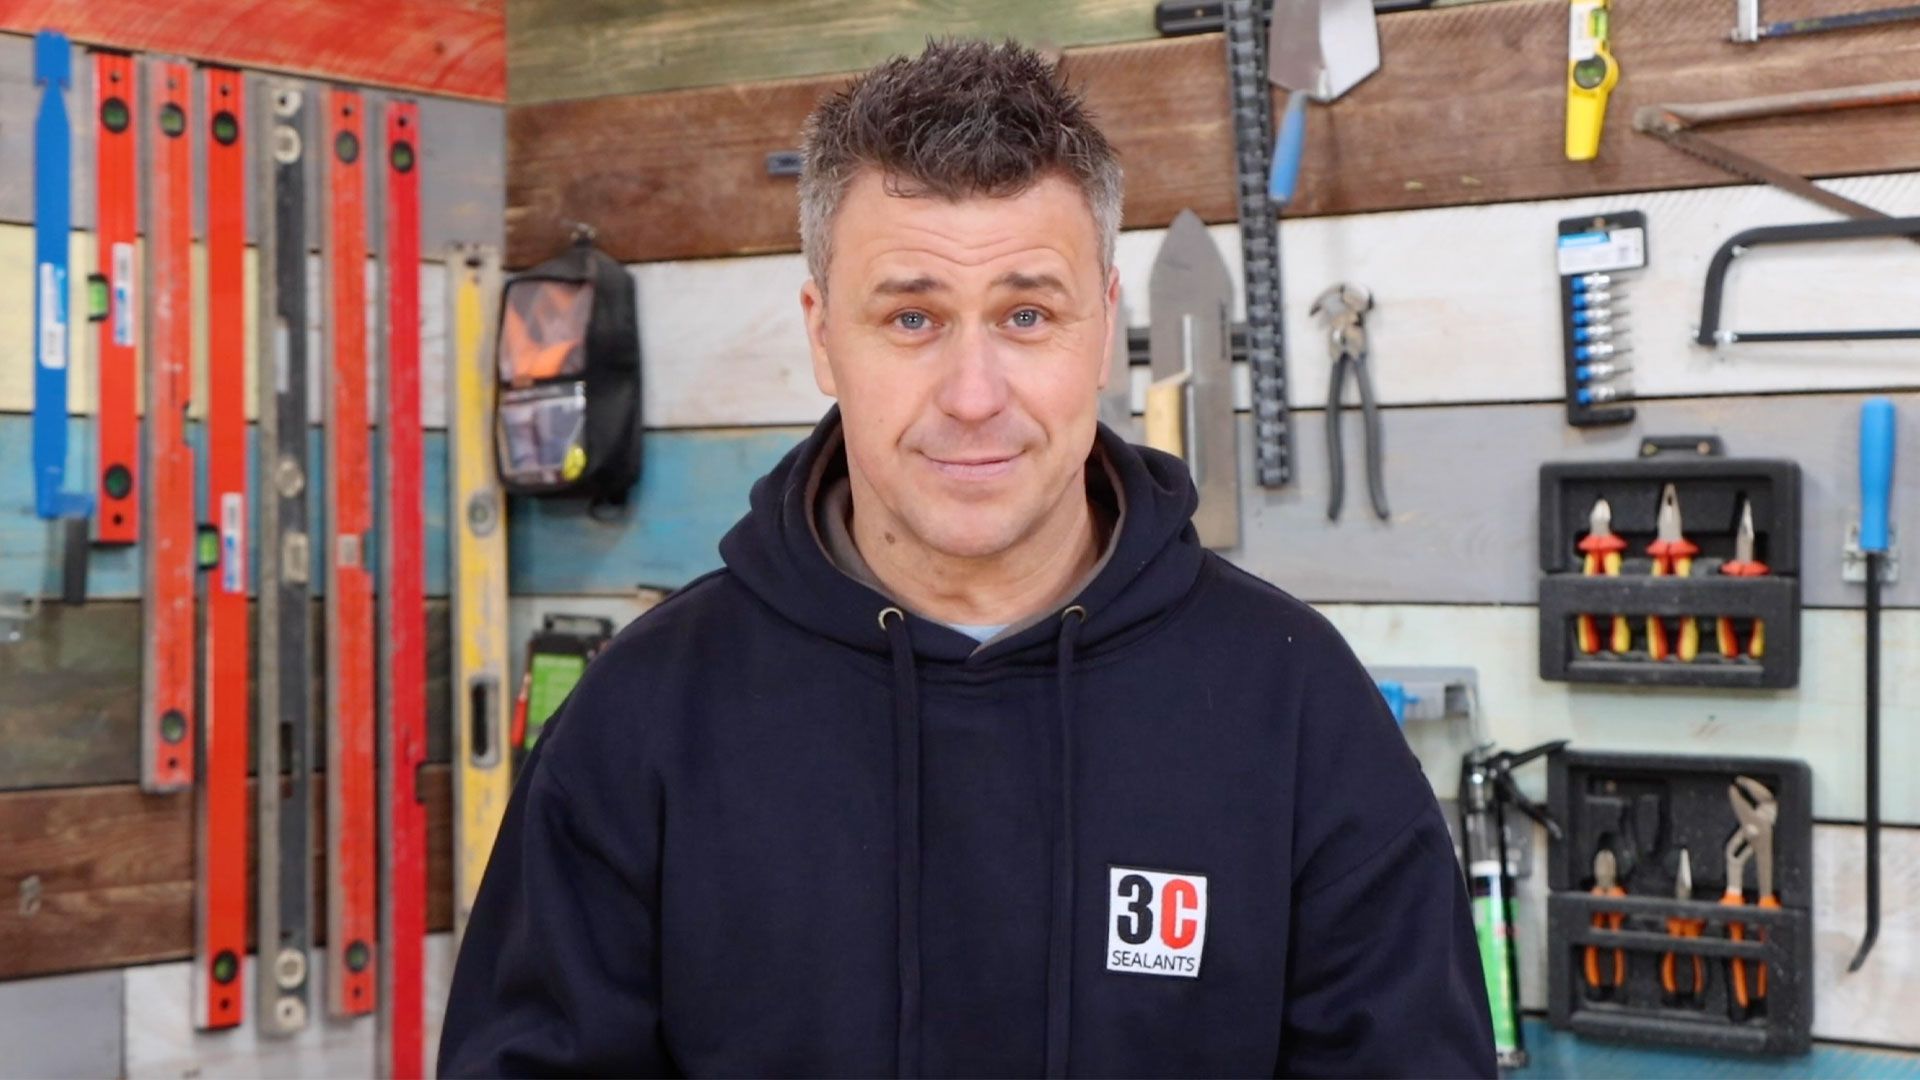 Introduction to our 3C Sealants Ambassador Craig Phillips from Mr and Mrs DIY